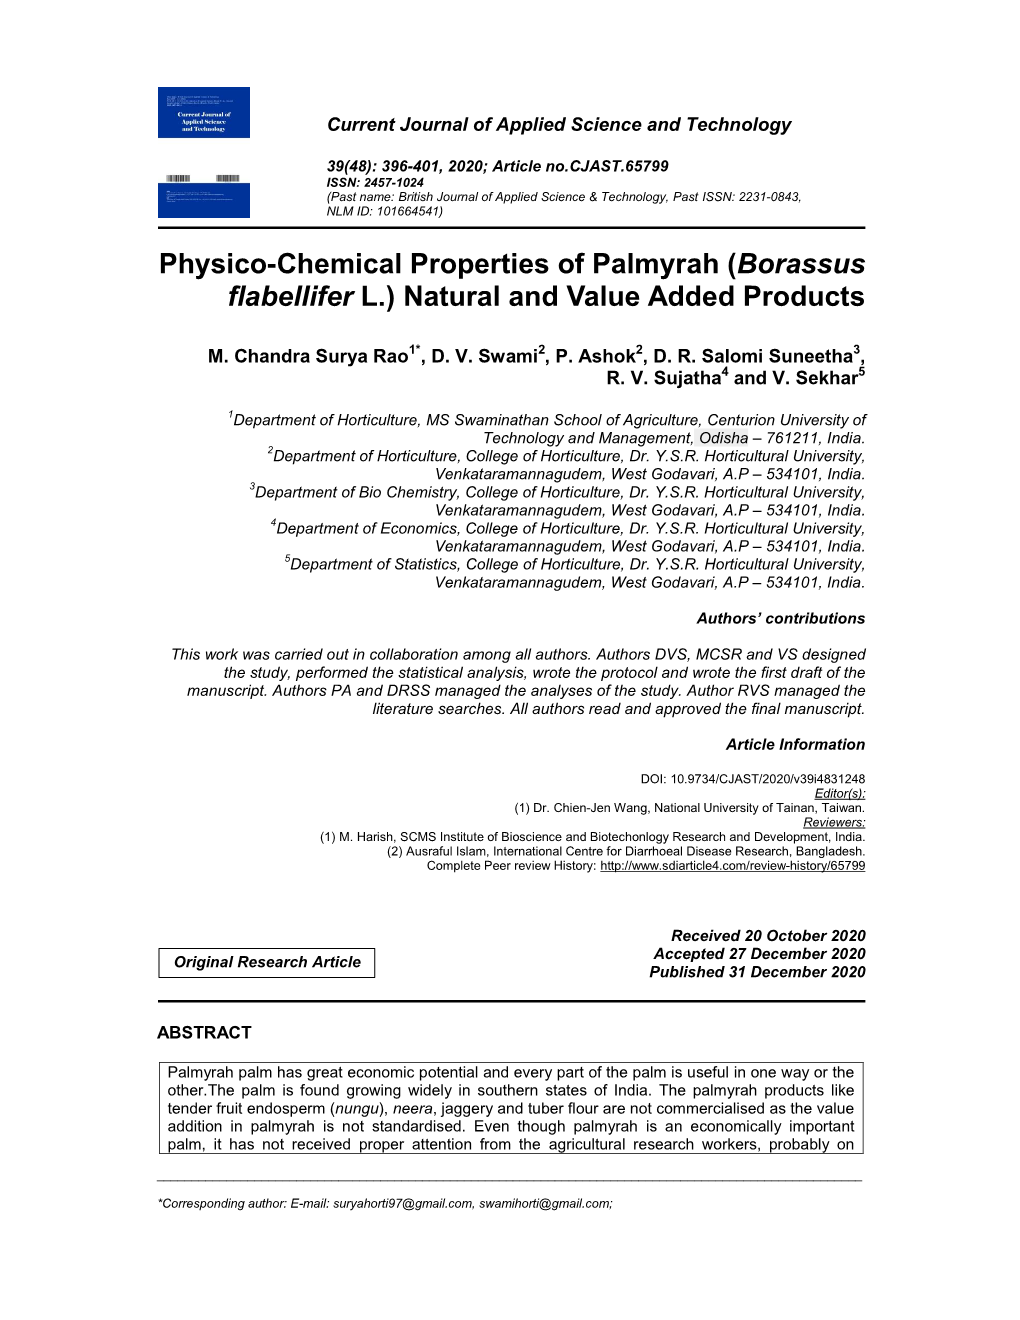 Physico-Chemical Properties of Palmyrah (Borassus Flabellifer L.) Natural and Value Added Products